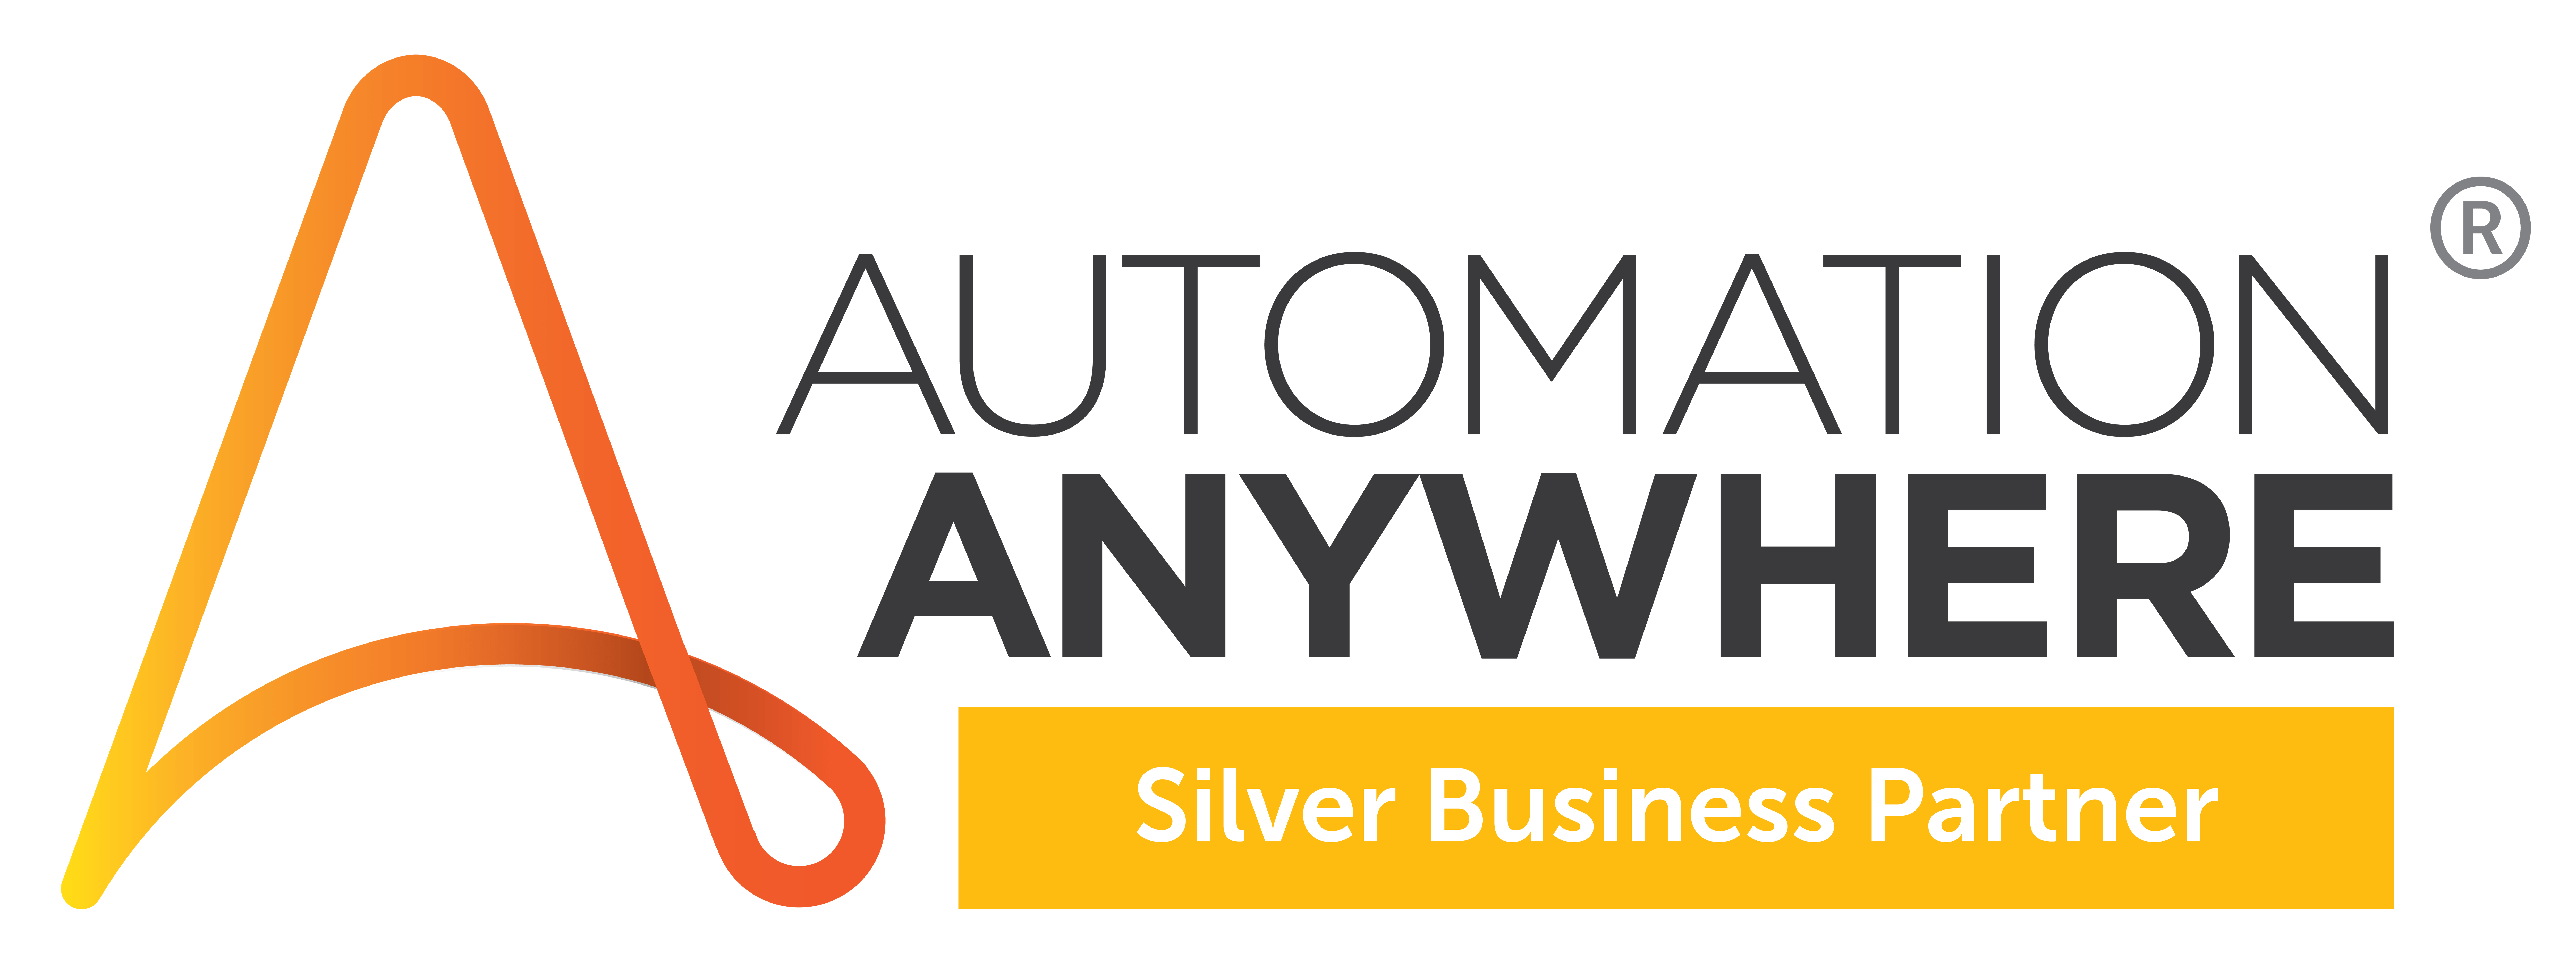 Automation Anywhere Silver Business Partner